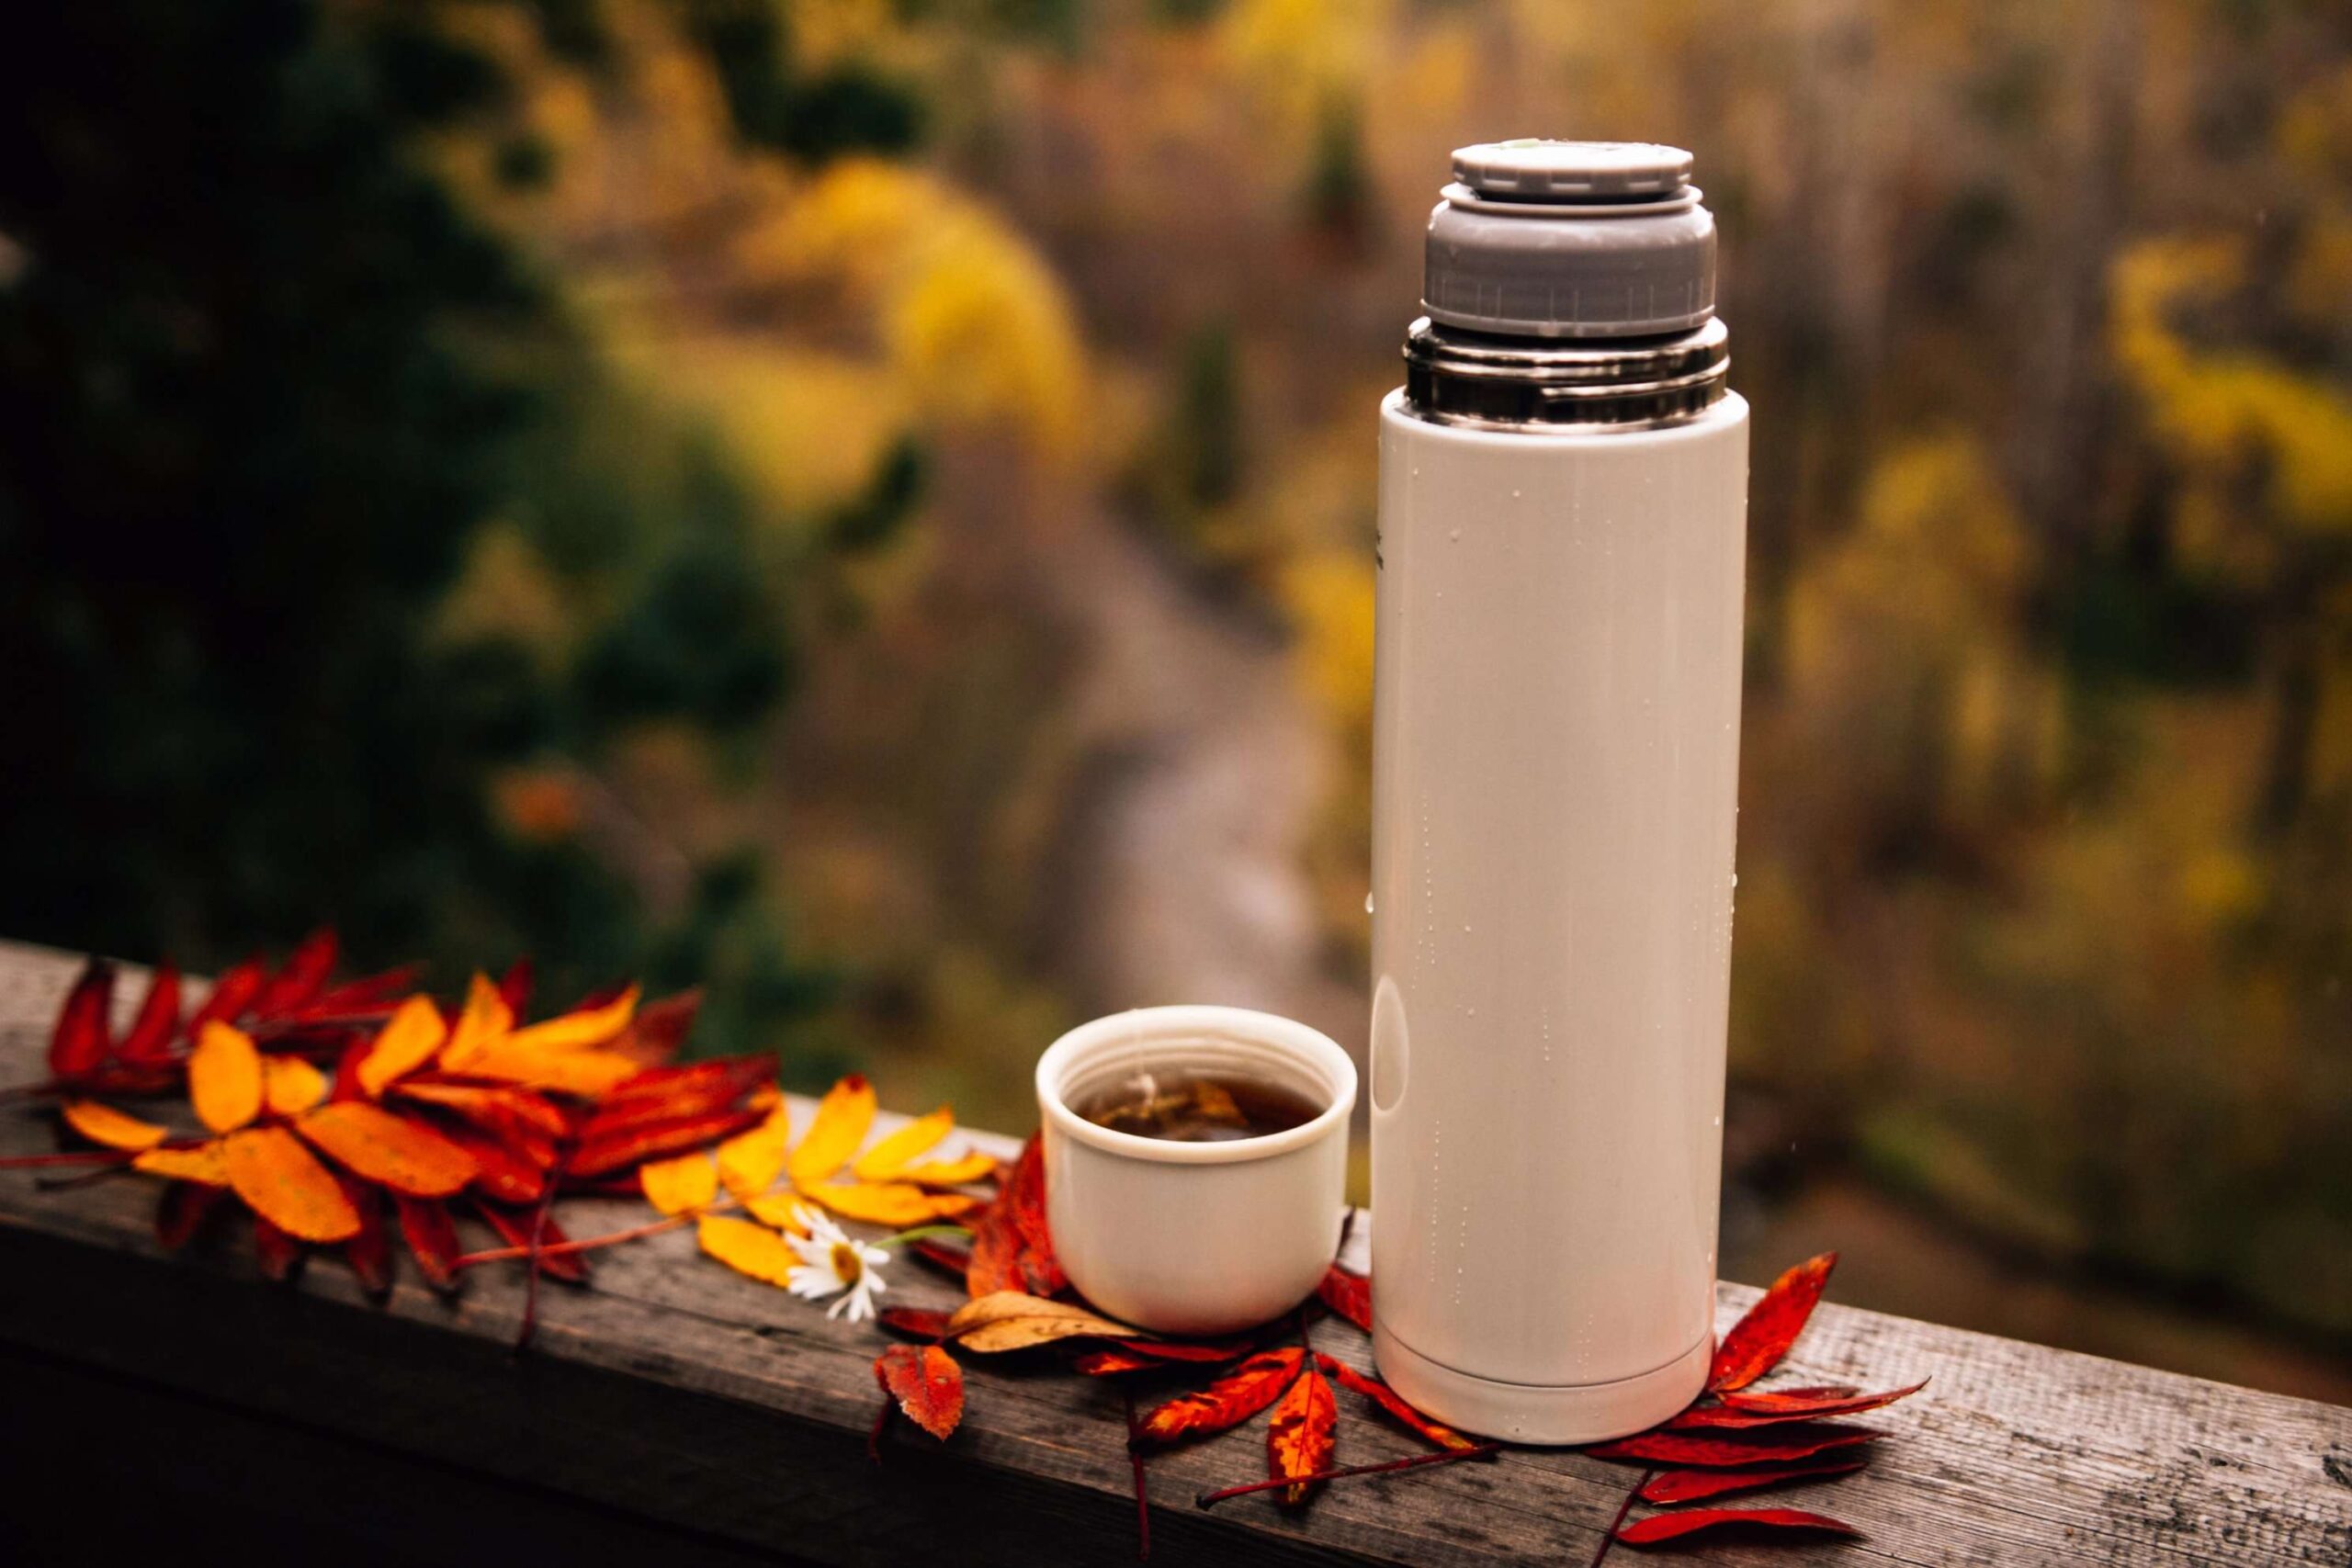 A warm fall drink from a thermos set outside on a deck